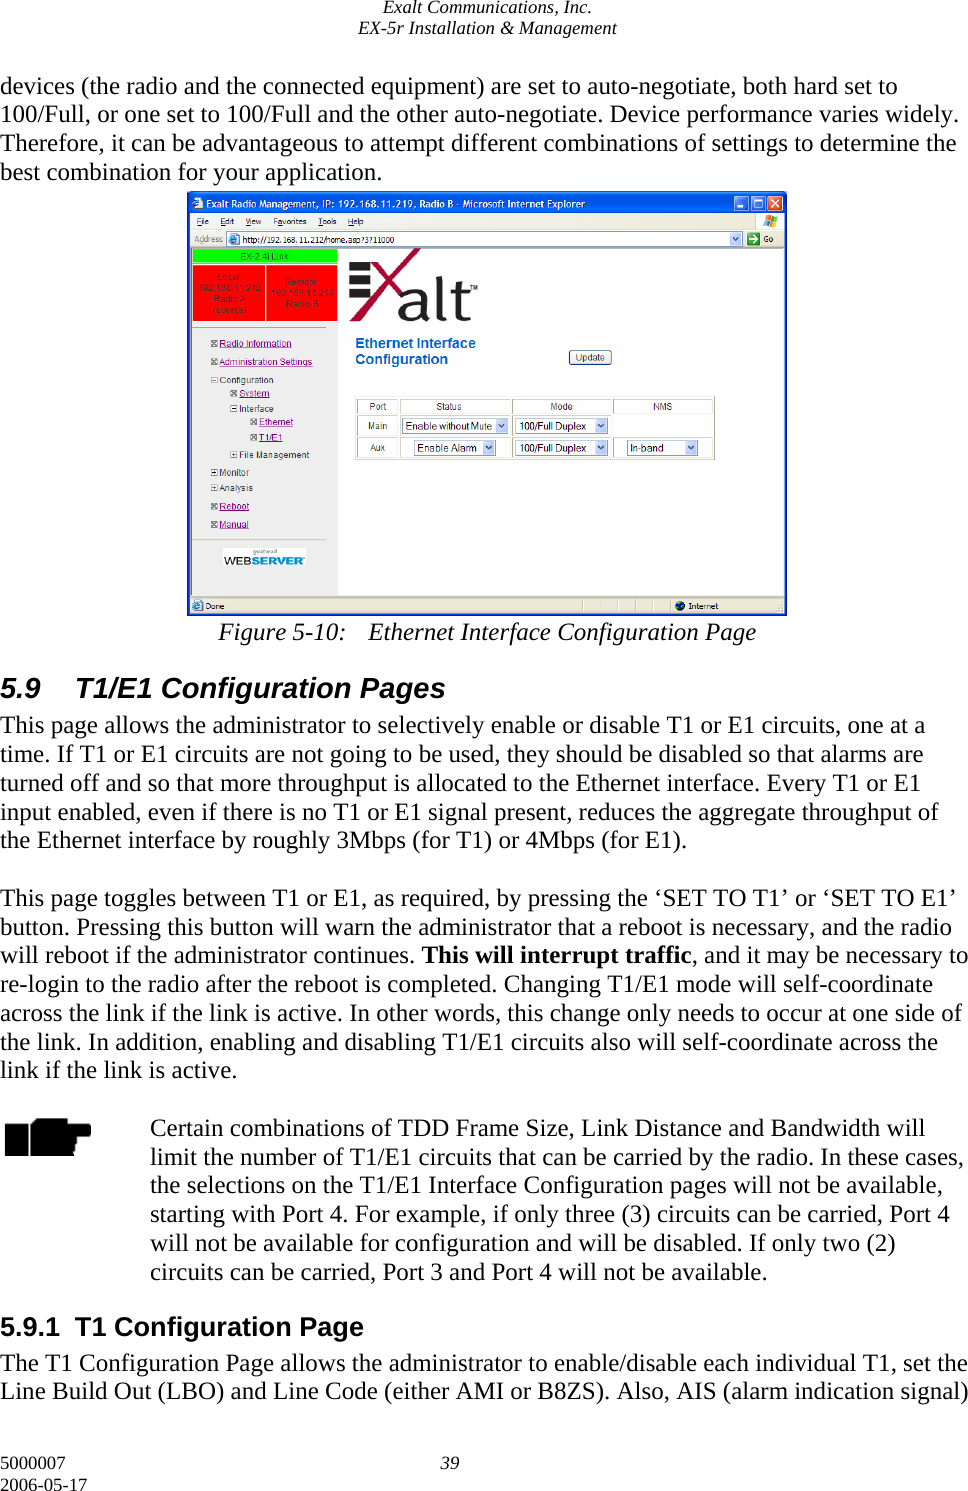 Exalt Communications, Inc. EX-5r Installation &amp; Management 5000007  39 2006-05-17 devices (the radio and the connected equipment) are set to auto-negotiate, both hard set to 100/Full, or one set to 100/Full and the other auto-negotiate. Device performance varies widely. Therefore, it can be advantageous to attempt different combinations of settings to determine the best combination for your application.                Figure 5-10:  Ethernet Interface Configuration Page 5.9  T1/E1 Configuration Pages This page allows the administrator to selectively enable or disable T1 or E1 circuits, one at a time. If T1 or E1 circuits are not going to be used, they should be disabled so that alarms are turned off and so that more throughput is allocated to the Ethernet interface. Every T1 or E1 input enabled, even if there is no T1 or E1 signal present, reduces the aggregate throughput of the Ethernet interface by roughly 3Mbps (for T1) or 4Mbps (for E1).  This page toggles between T1 or E1, as required, by pressing the ‘SET TO T1’ or ‘SET TO E1’ button. Pressing this button will warn the administrator that a reboot is necessary, and the radio will reboot if the administrator continues. This will interrupt traffic, and it may be necessary to re-login to the radio after the reboot is completed. Changing T1/E1 mode will self-coordinate across the link if the link is active. In other words, this change only needs to occur at one side of the link. In addition, enabling and disabling T1/E1 circuits also will self-coordinate across the link if the link is active.  Certain combinations of TDD Frame Size, Link Distance and Bandwidth will limit the number of T1/E1 circuits that can be carried by the radio. In these cases, the selections on the T1/E1 Interface Configuration pages will not be available, starting with Port 4. For example, if only three (3) circuits can be carried, Port 4 will not be available for configuration and will be disabled. If only two (2) circuits can be carried, Port 3 and Port 4 will not be available. 5.9.1 T1 Configuration Page The T1 Configuration Page allows the administrator to enable/disable each individual T1, set the Line Build Out (LBO) and Line Code (either AMI or B8ZS). Also, AIS (alarm indication signal) 